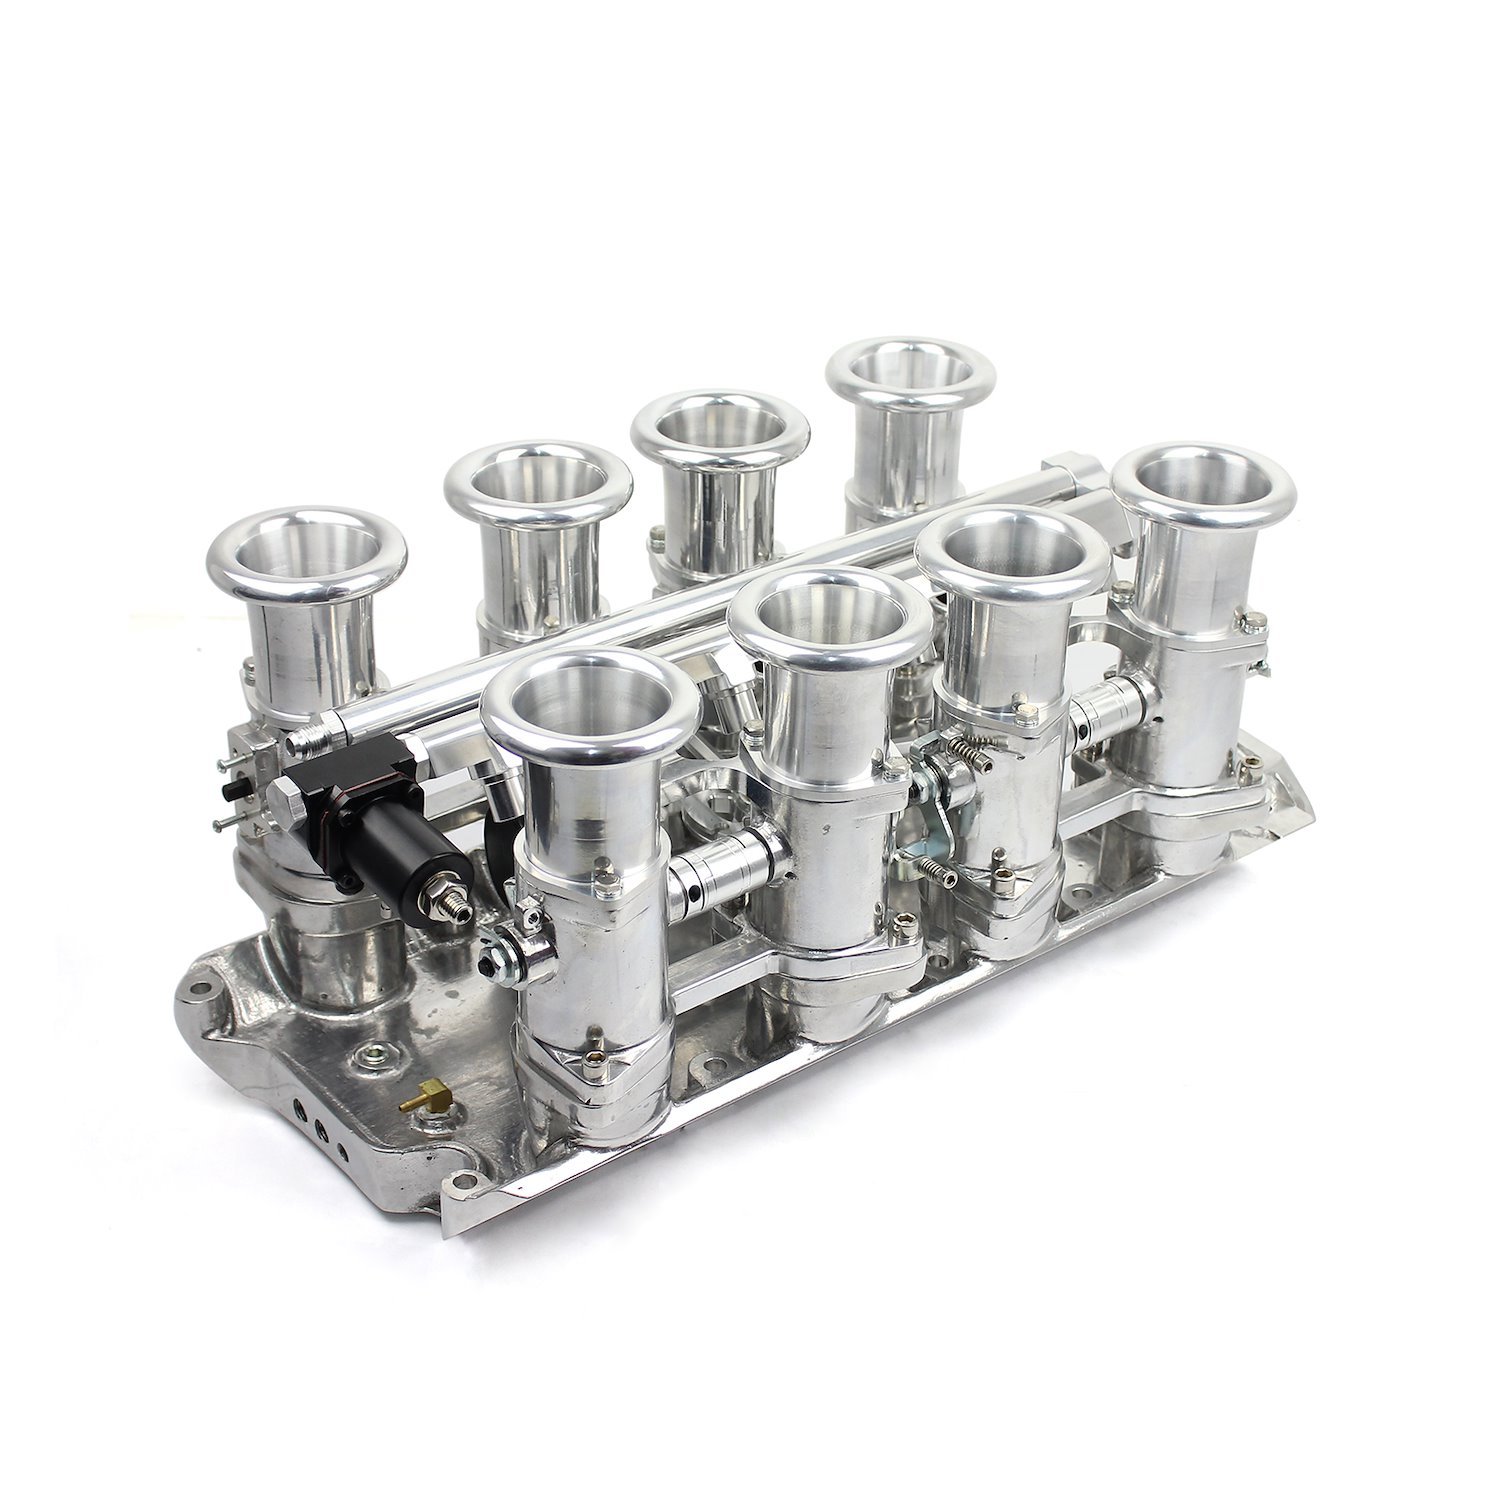 Downdraft EFI Stack Intake Manifold - Small Block Ford 260, 289, 302W Fuel Injected